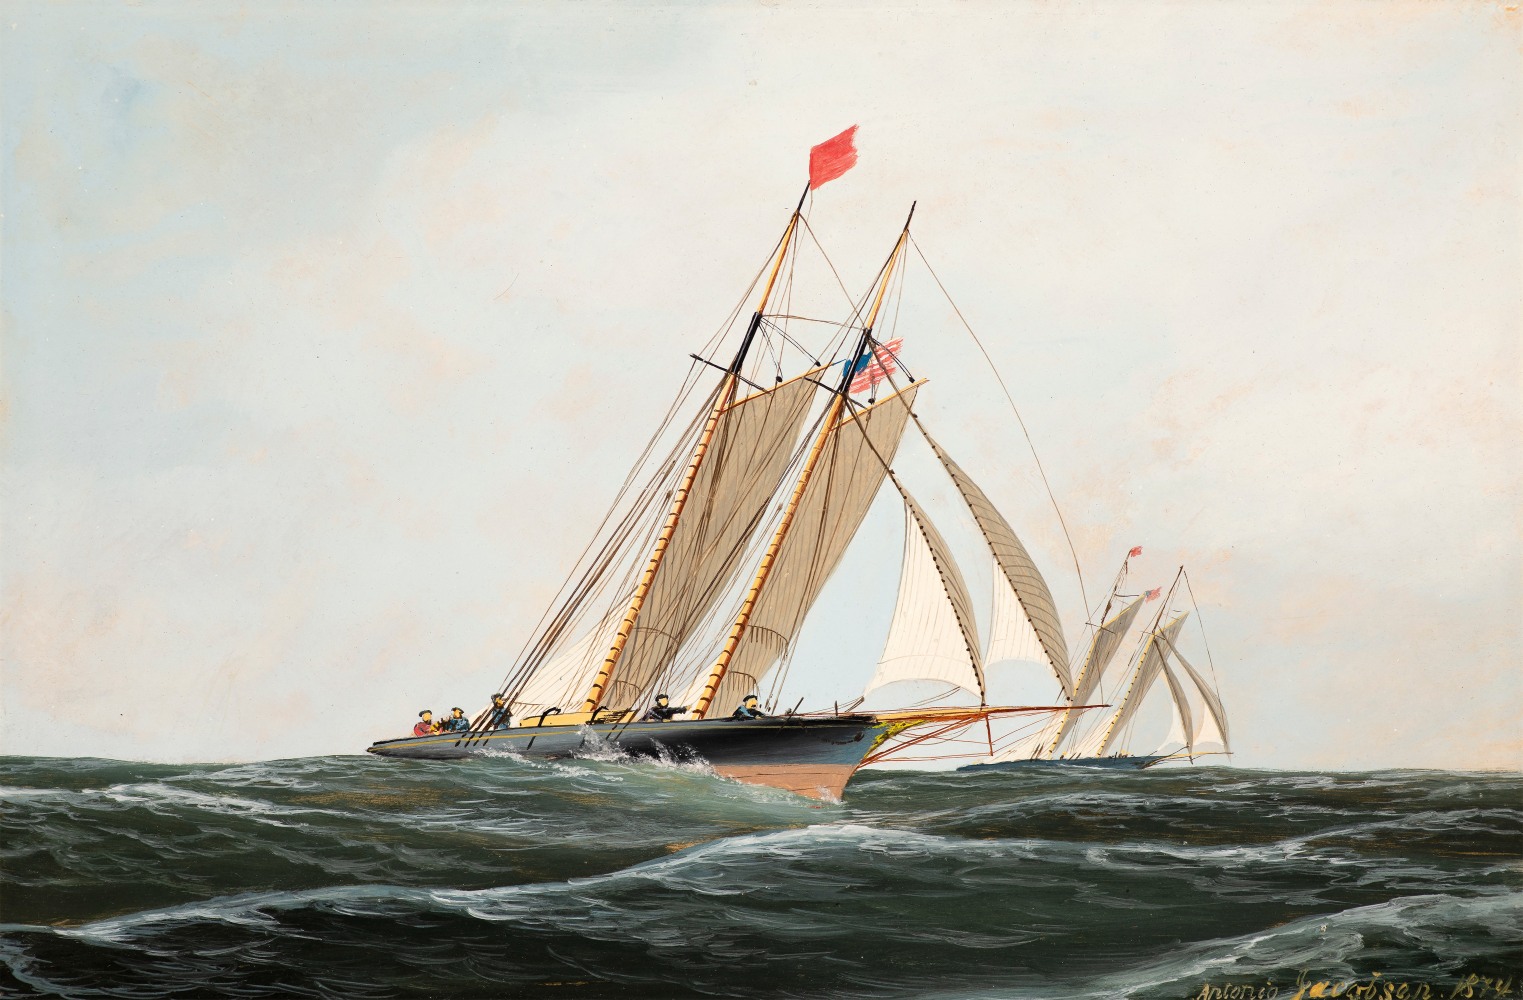 Antonio Jacobsen (1850–1921), The Yacht Race, 1874, oil on board, 9 1/2 x 14 1/4 in., signed and dated lower right: Antonio Jacobsen 1874